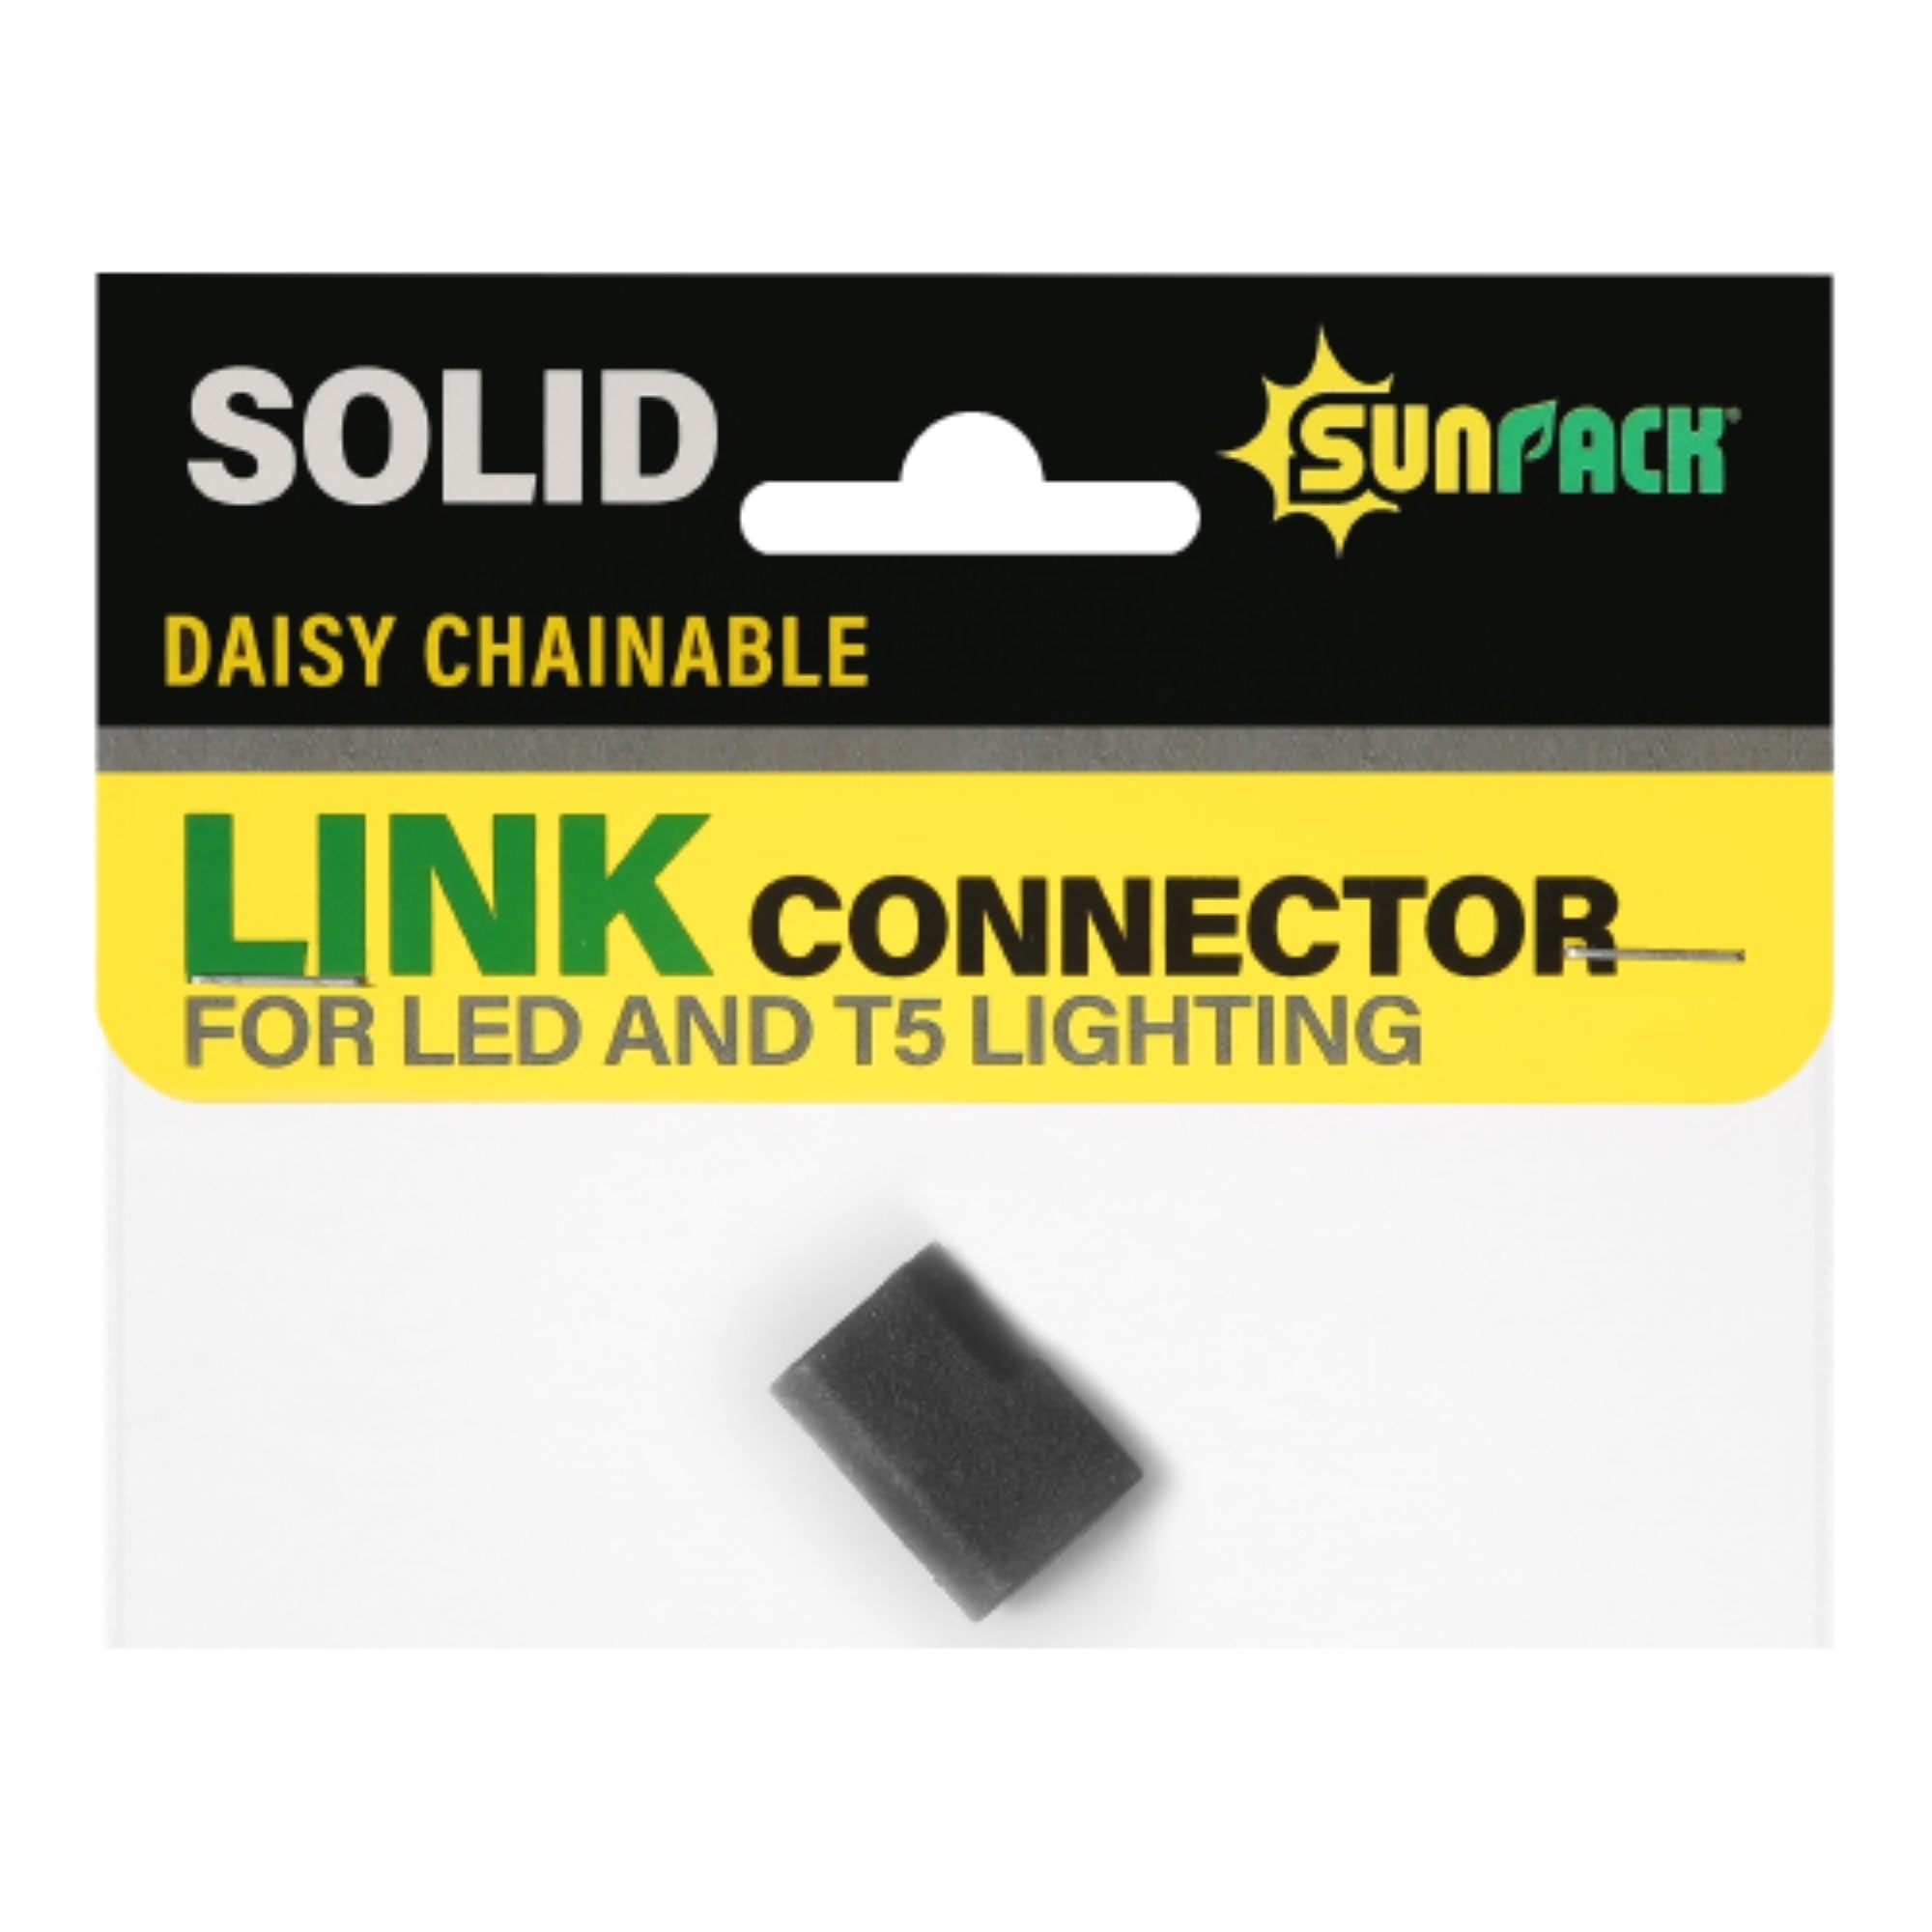 SunPack Daisy Chainable Link Connector for LED and T5 Lighting